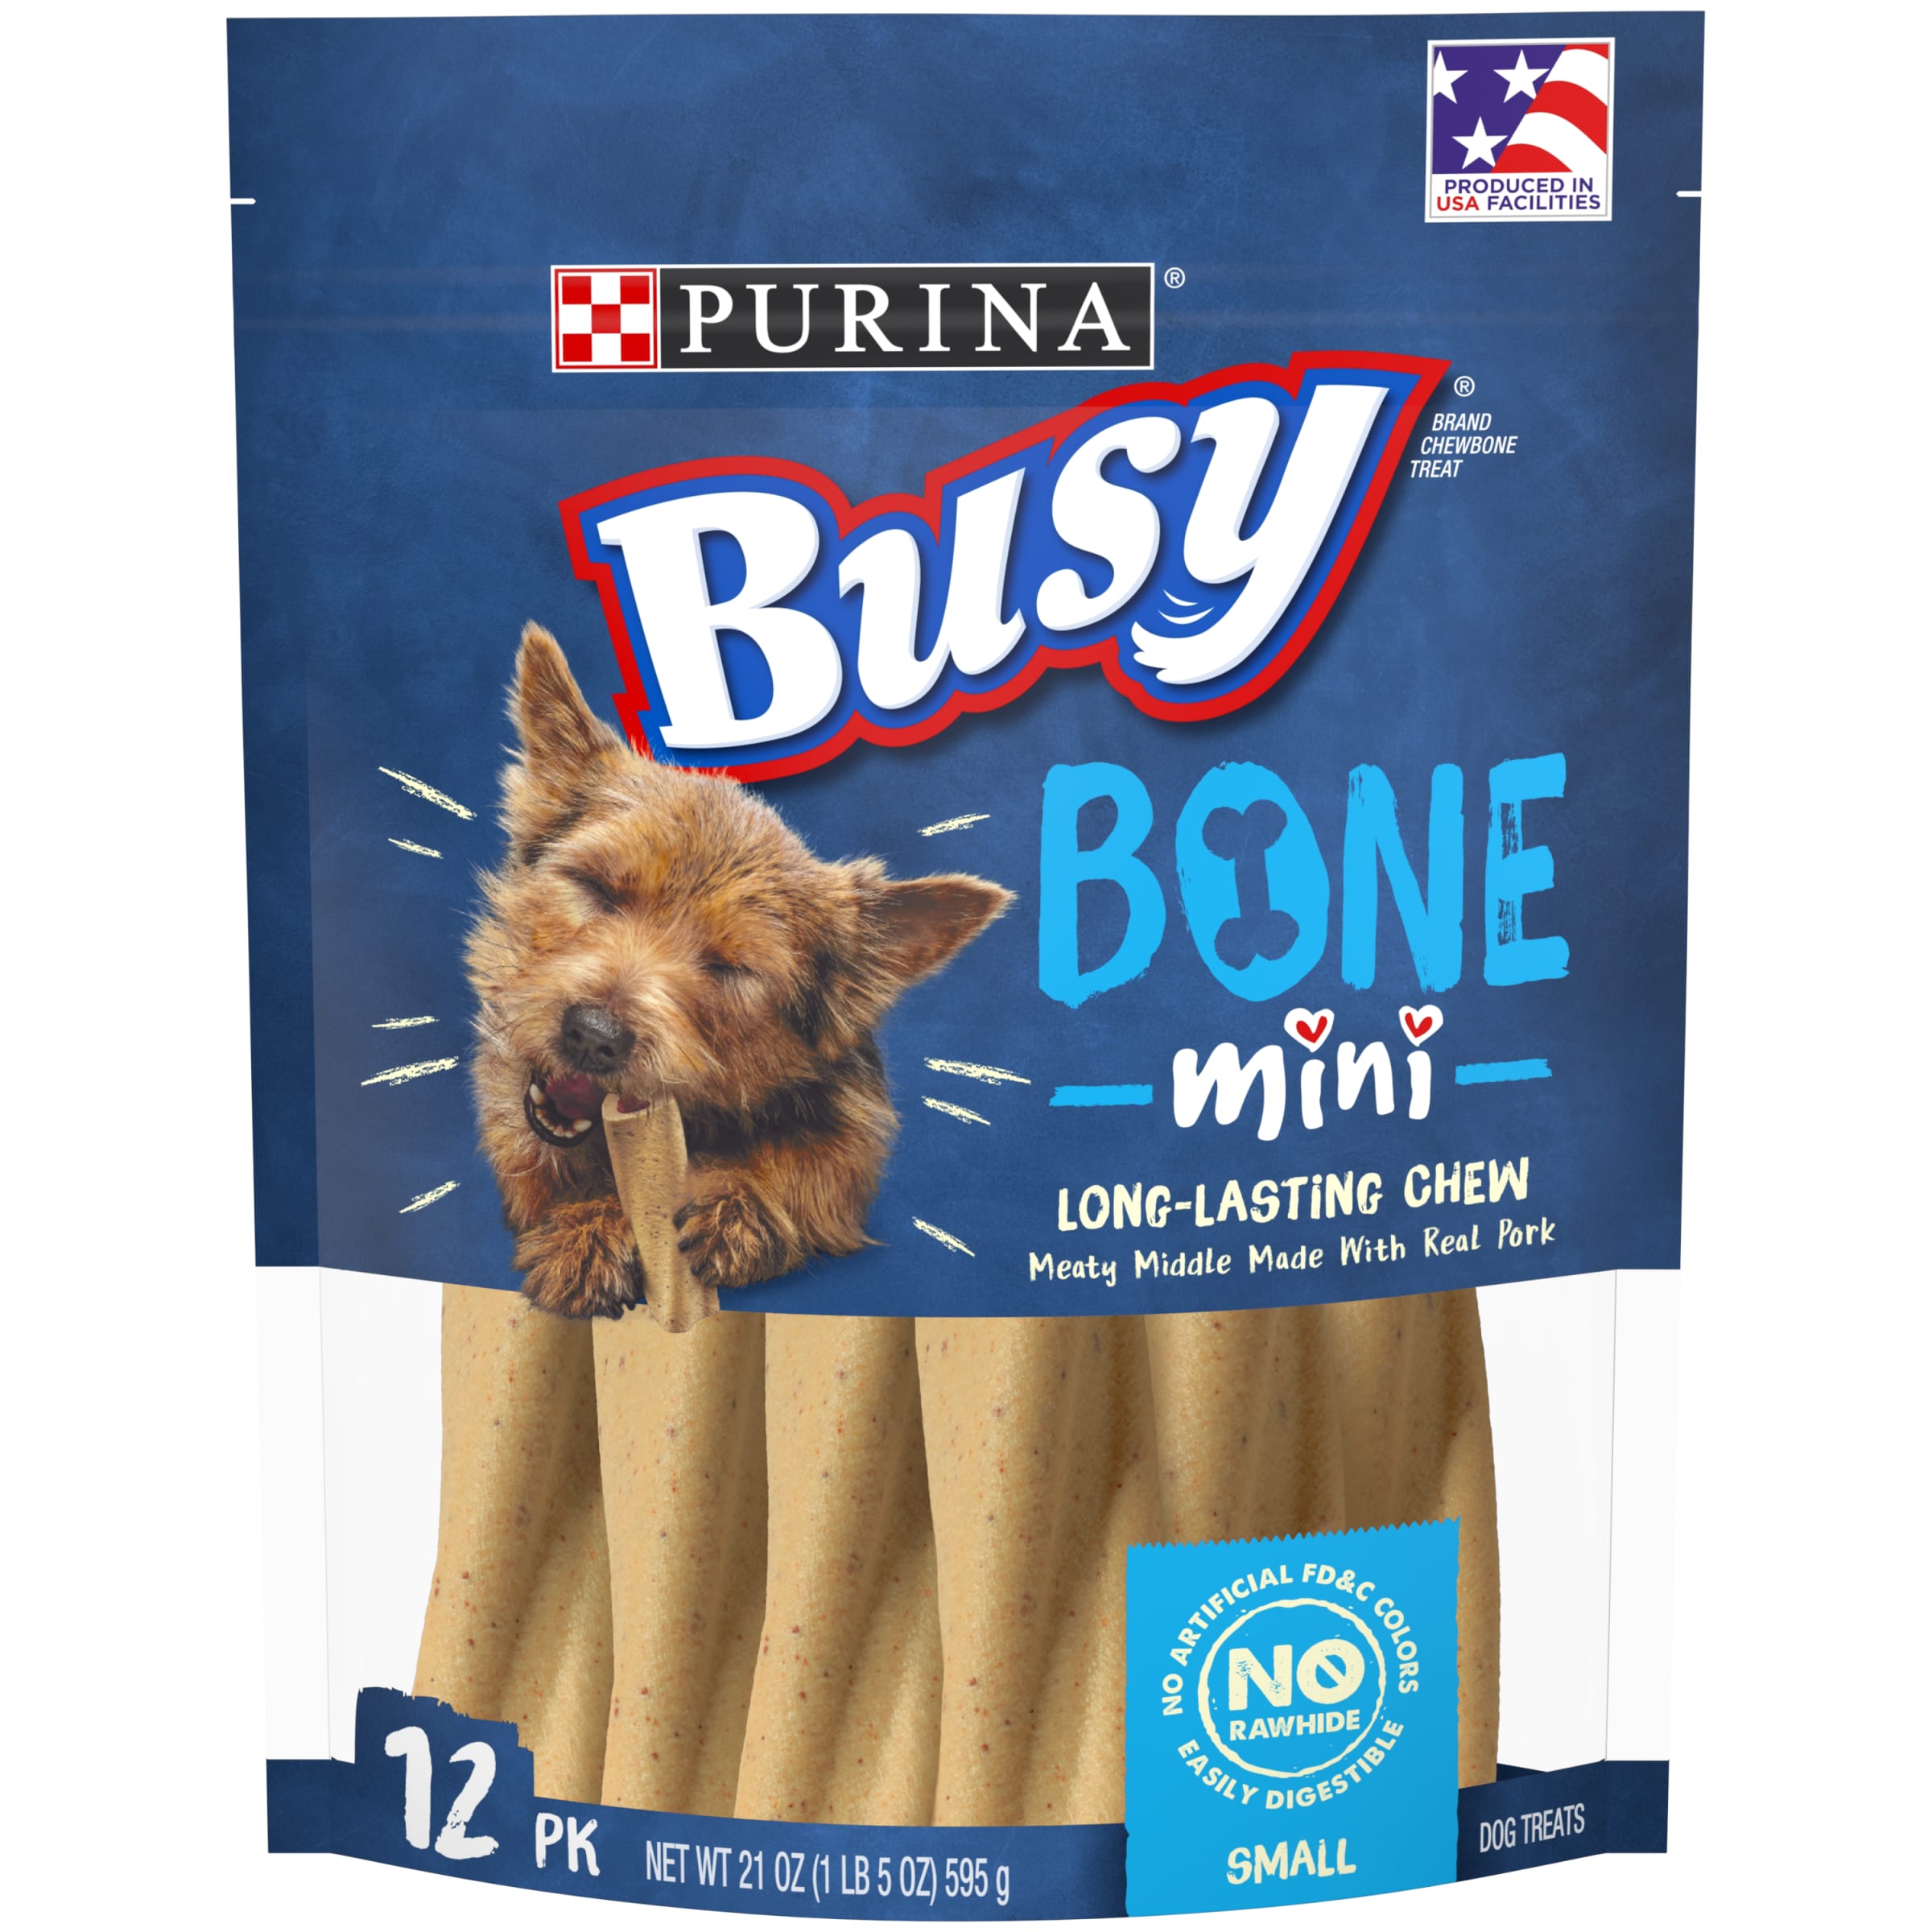 Purina Busy Bones Mini Dog Treats Long-Lasting Dry Chews, Real Pork for Small Dogs, 21 oz Pouch (12 Pack) - image 1 of 13